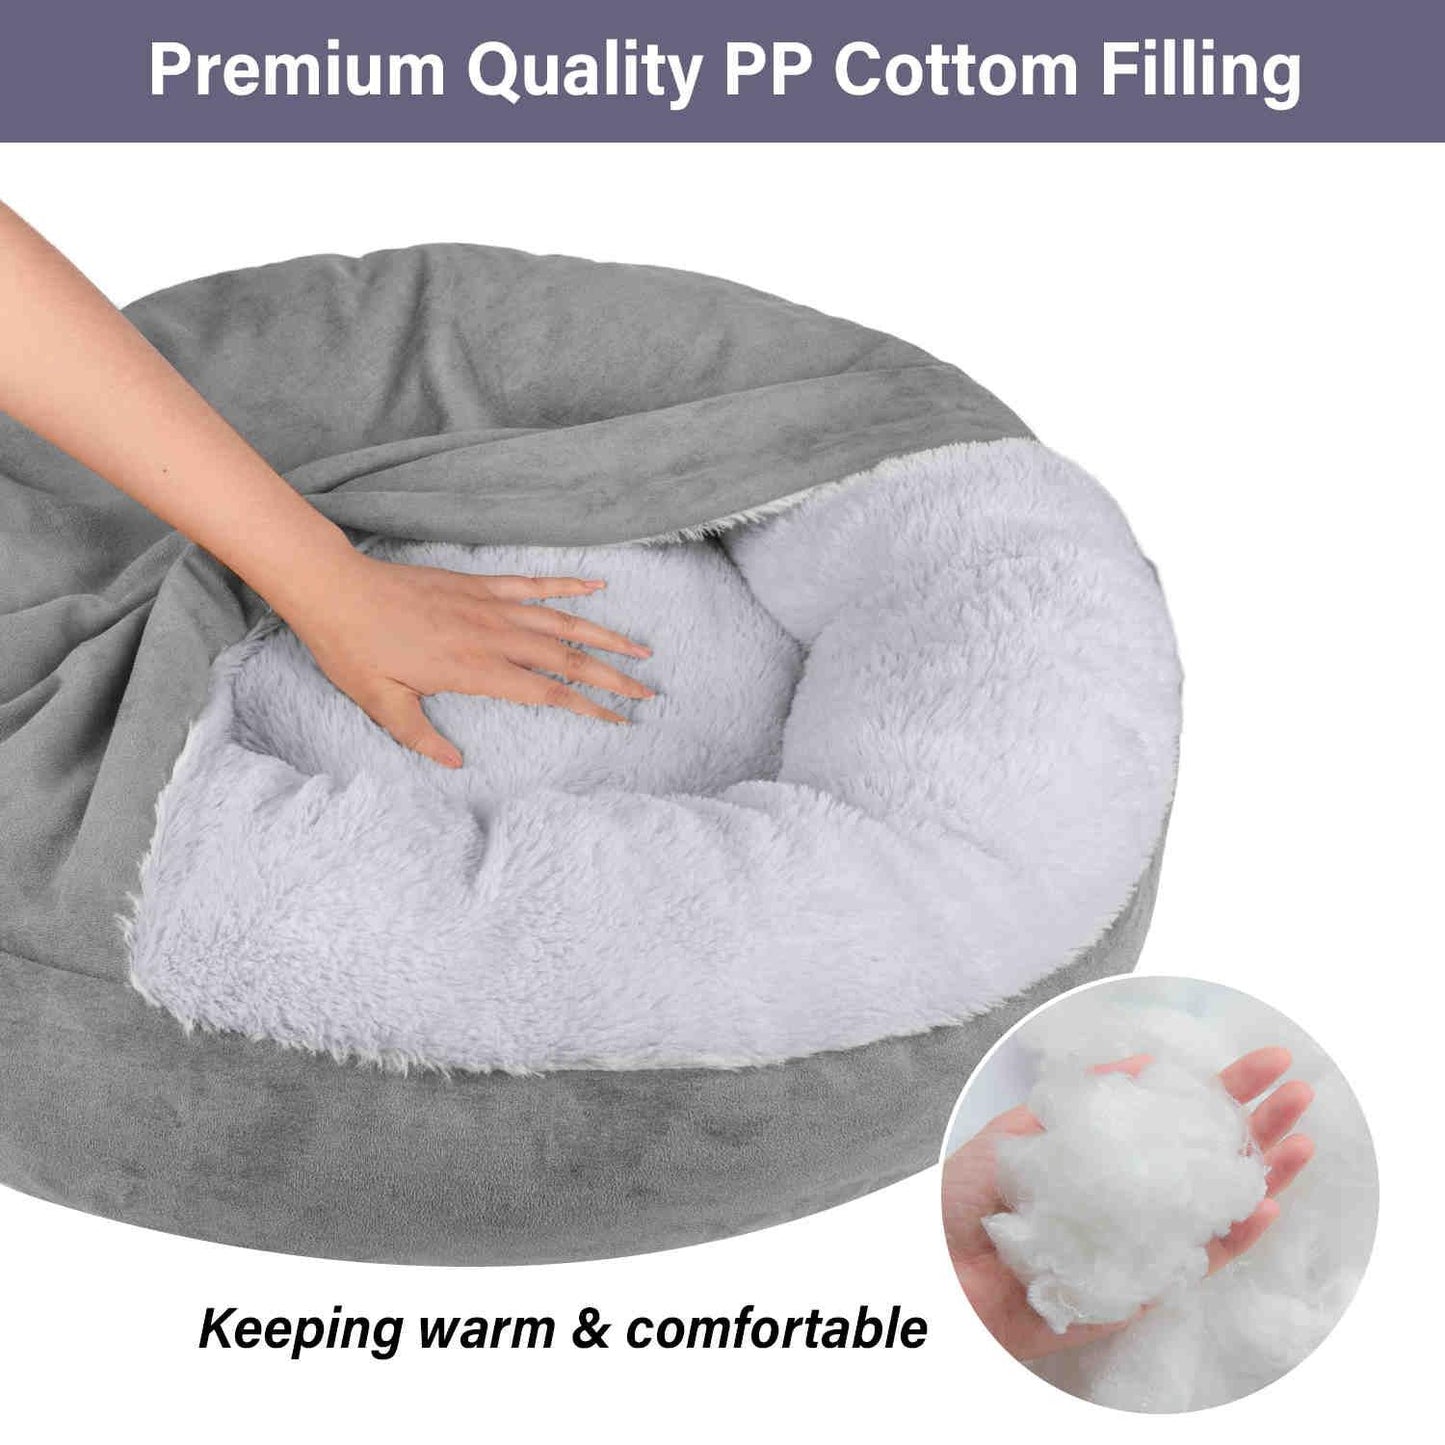 Covered Pet Bed, Washable, Gray